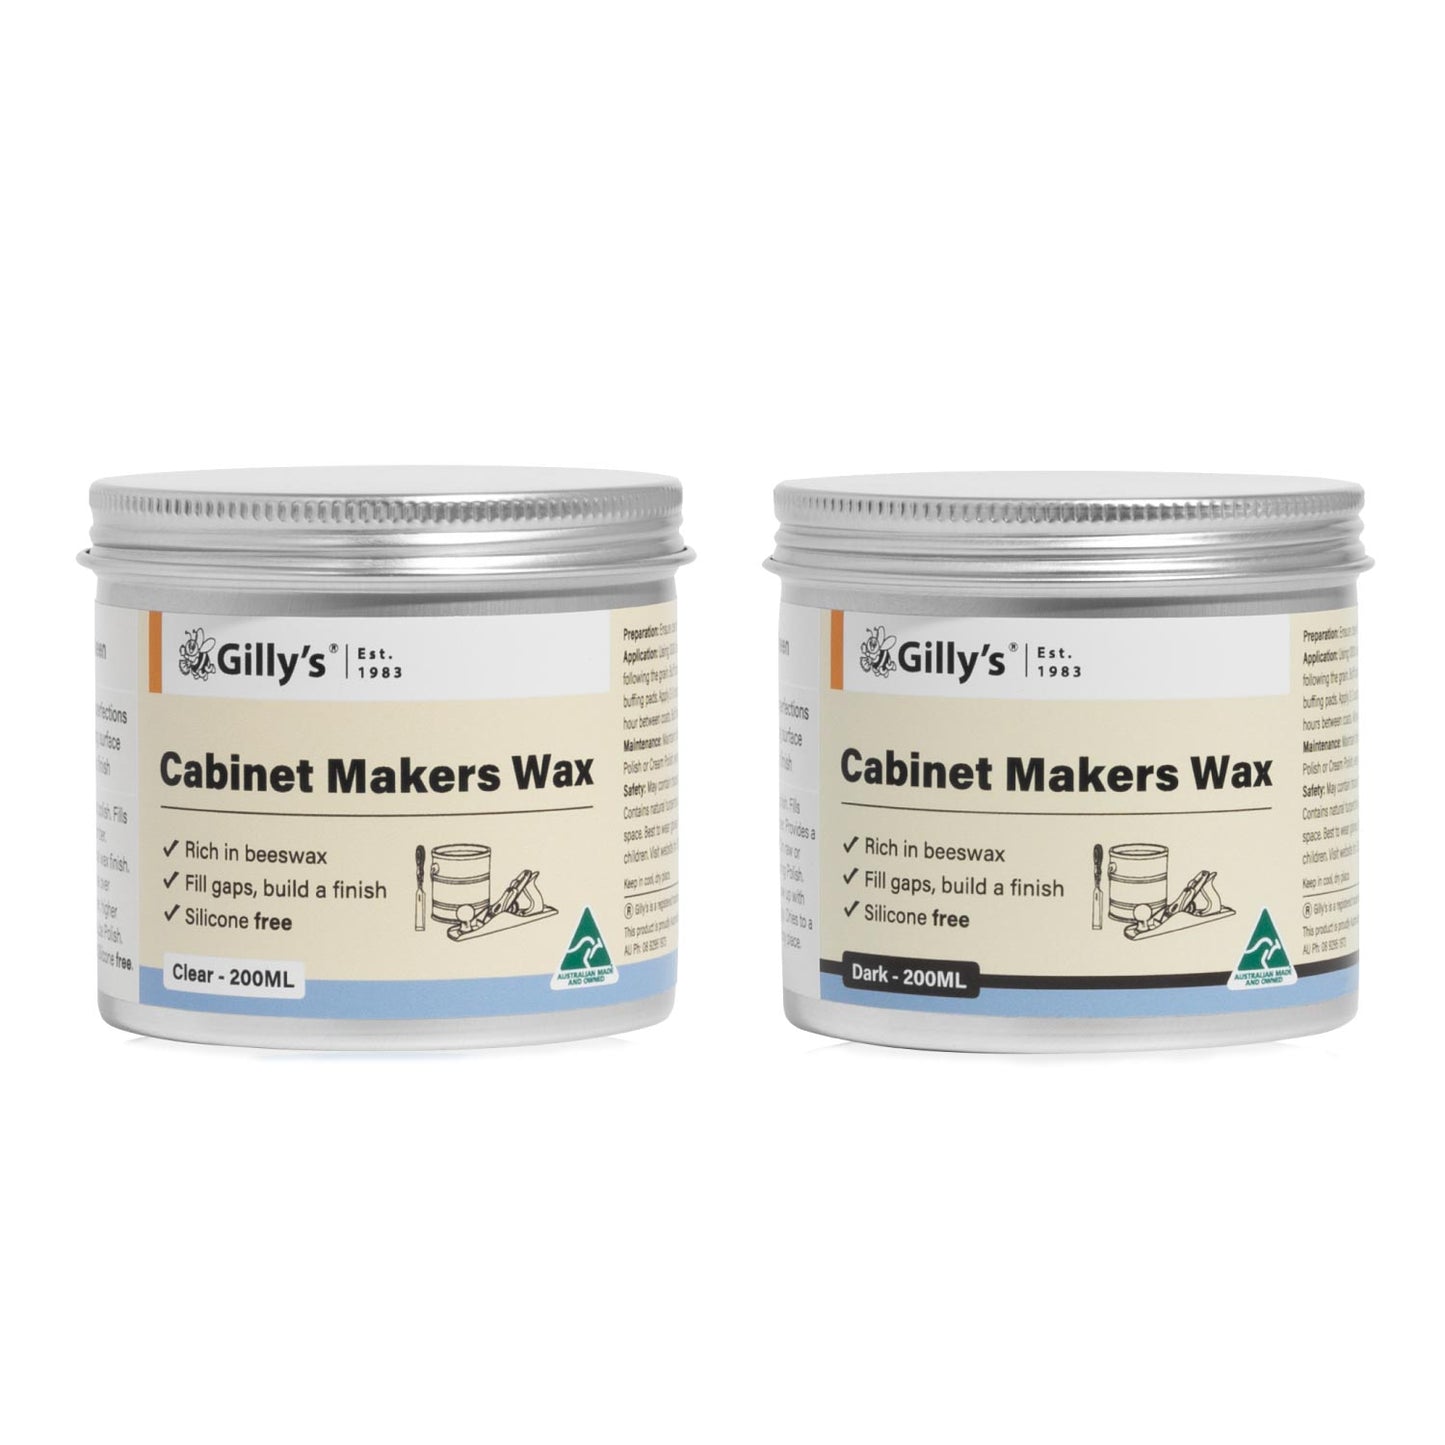 Cabinet Makers Wax